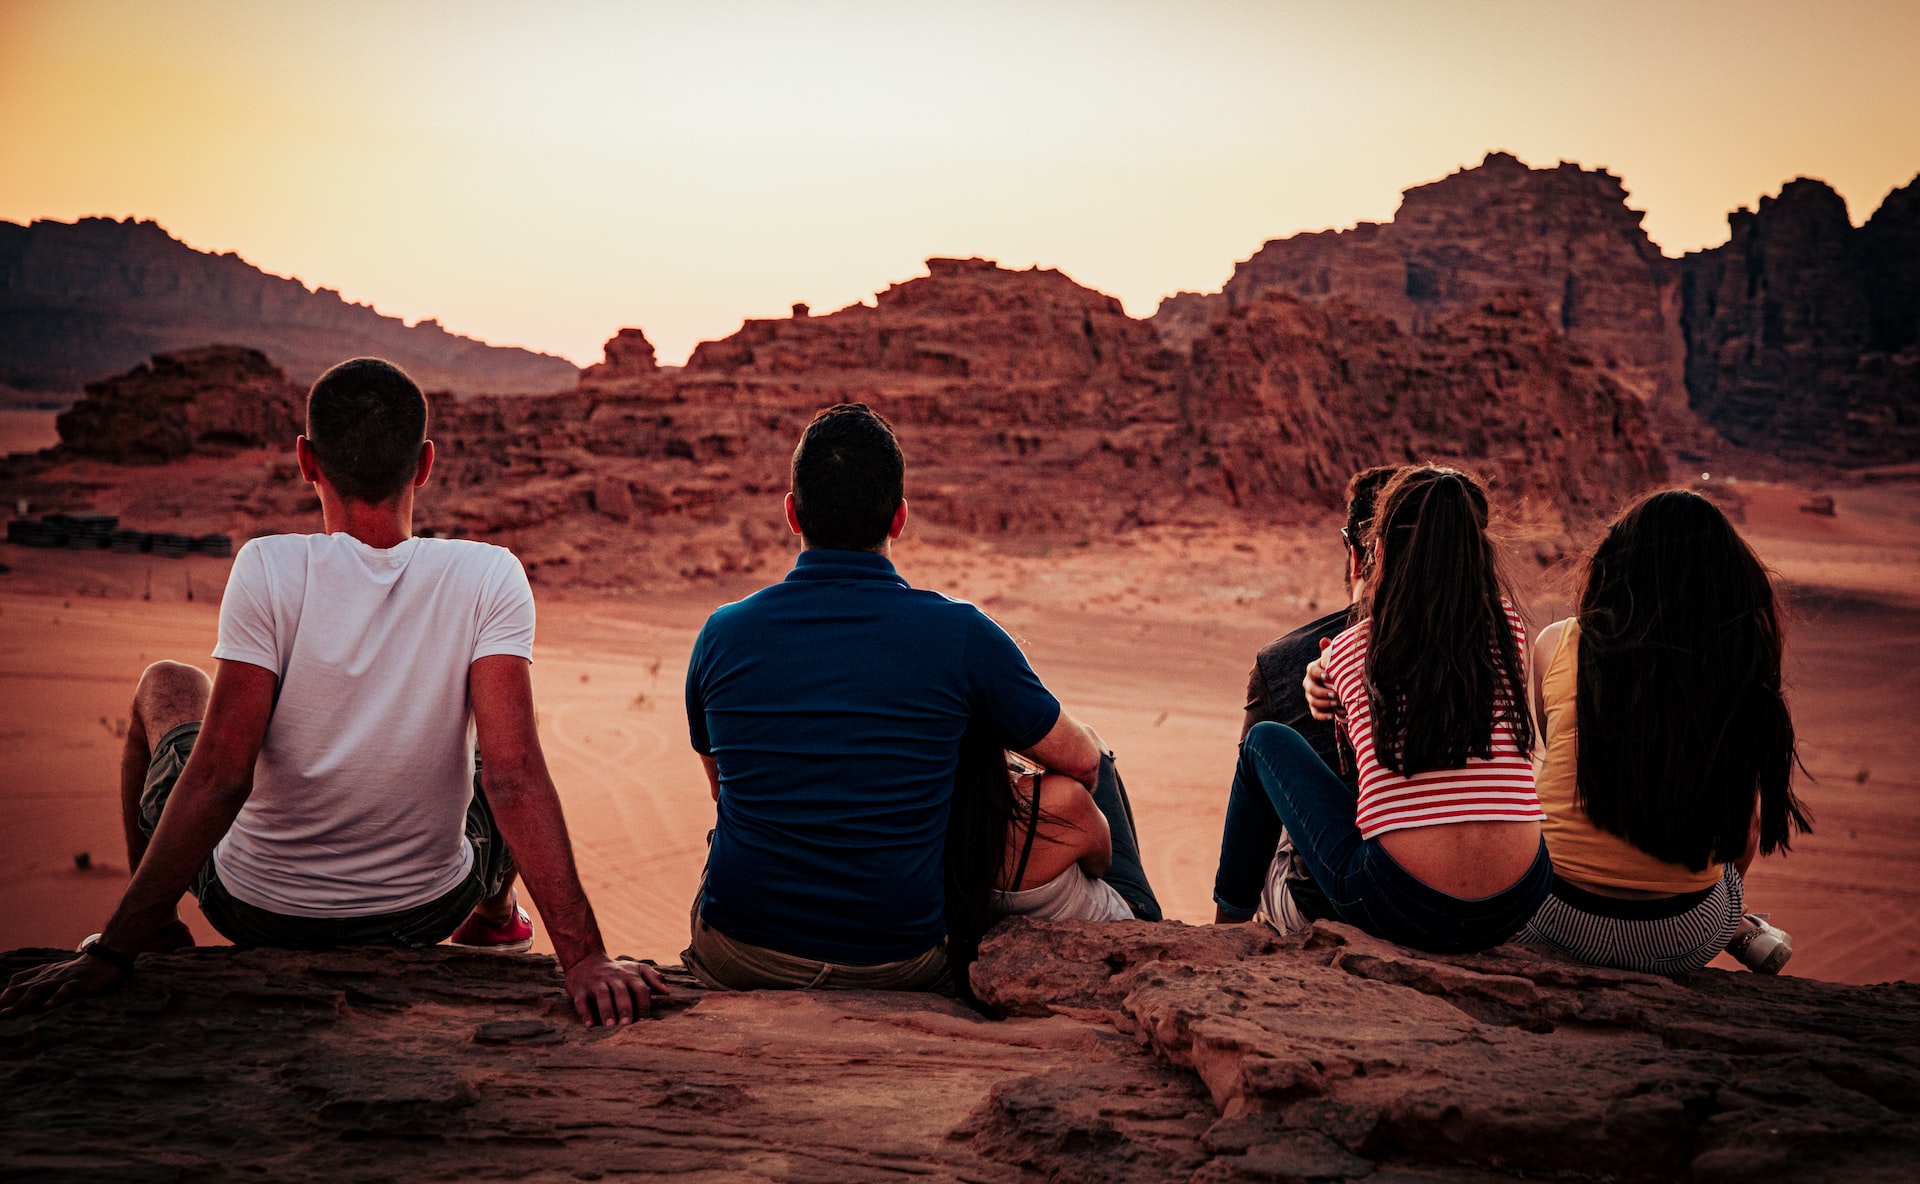 Reasons you should visit Wadi Rum from Israel- You can take the whole bunch